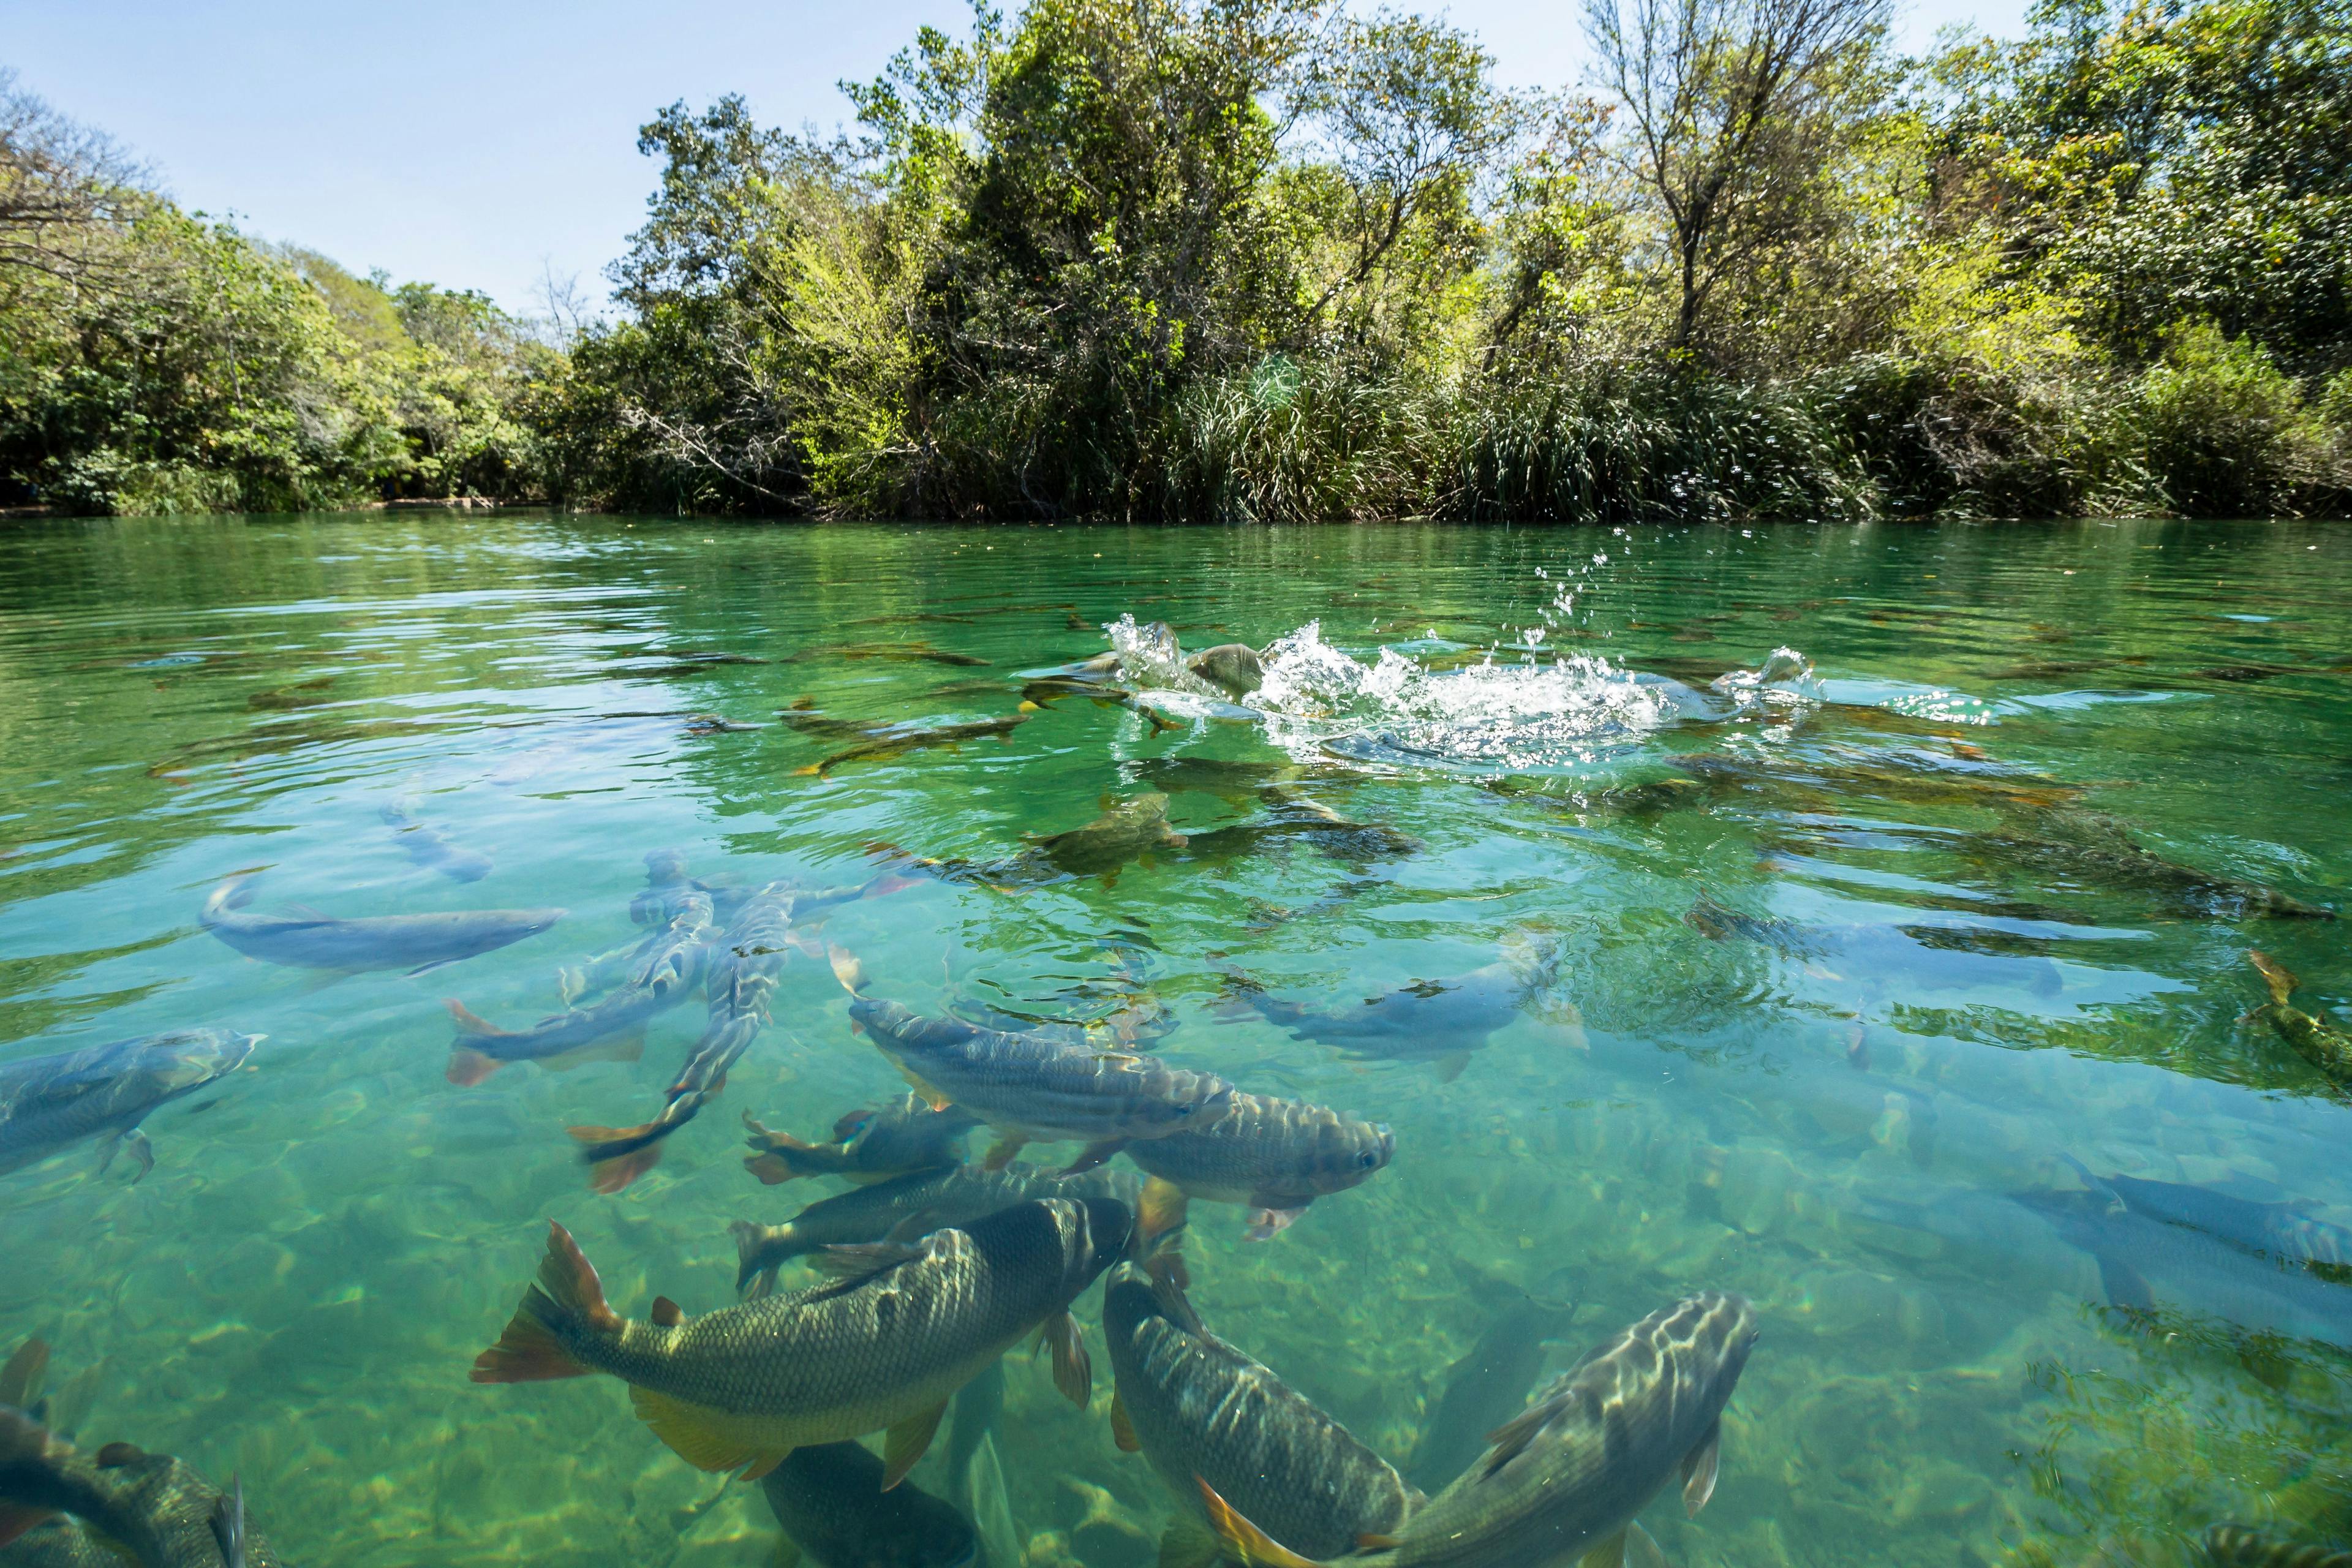 Big fishes in cristal clear water river | Image Credit: © Carolina - stock.adobe.com